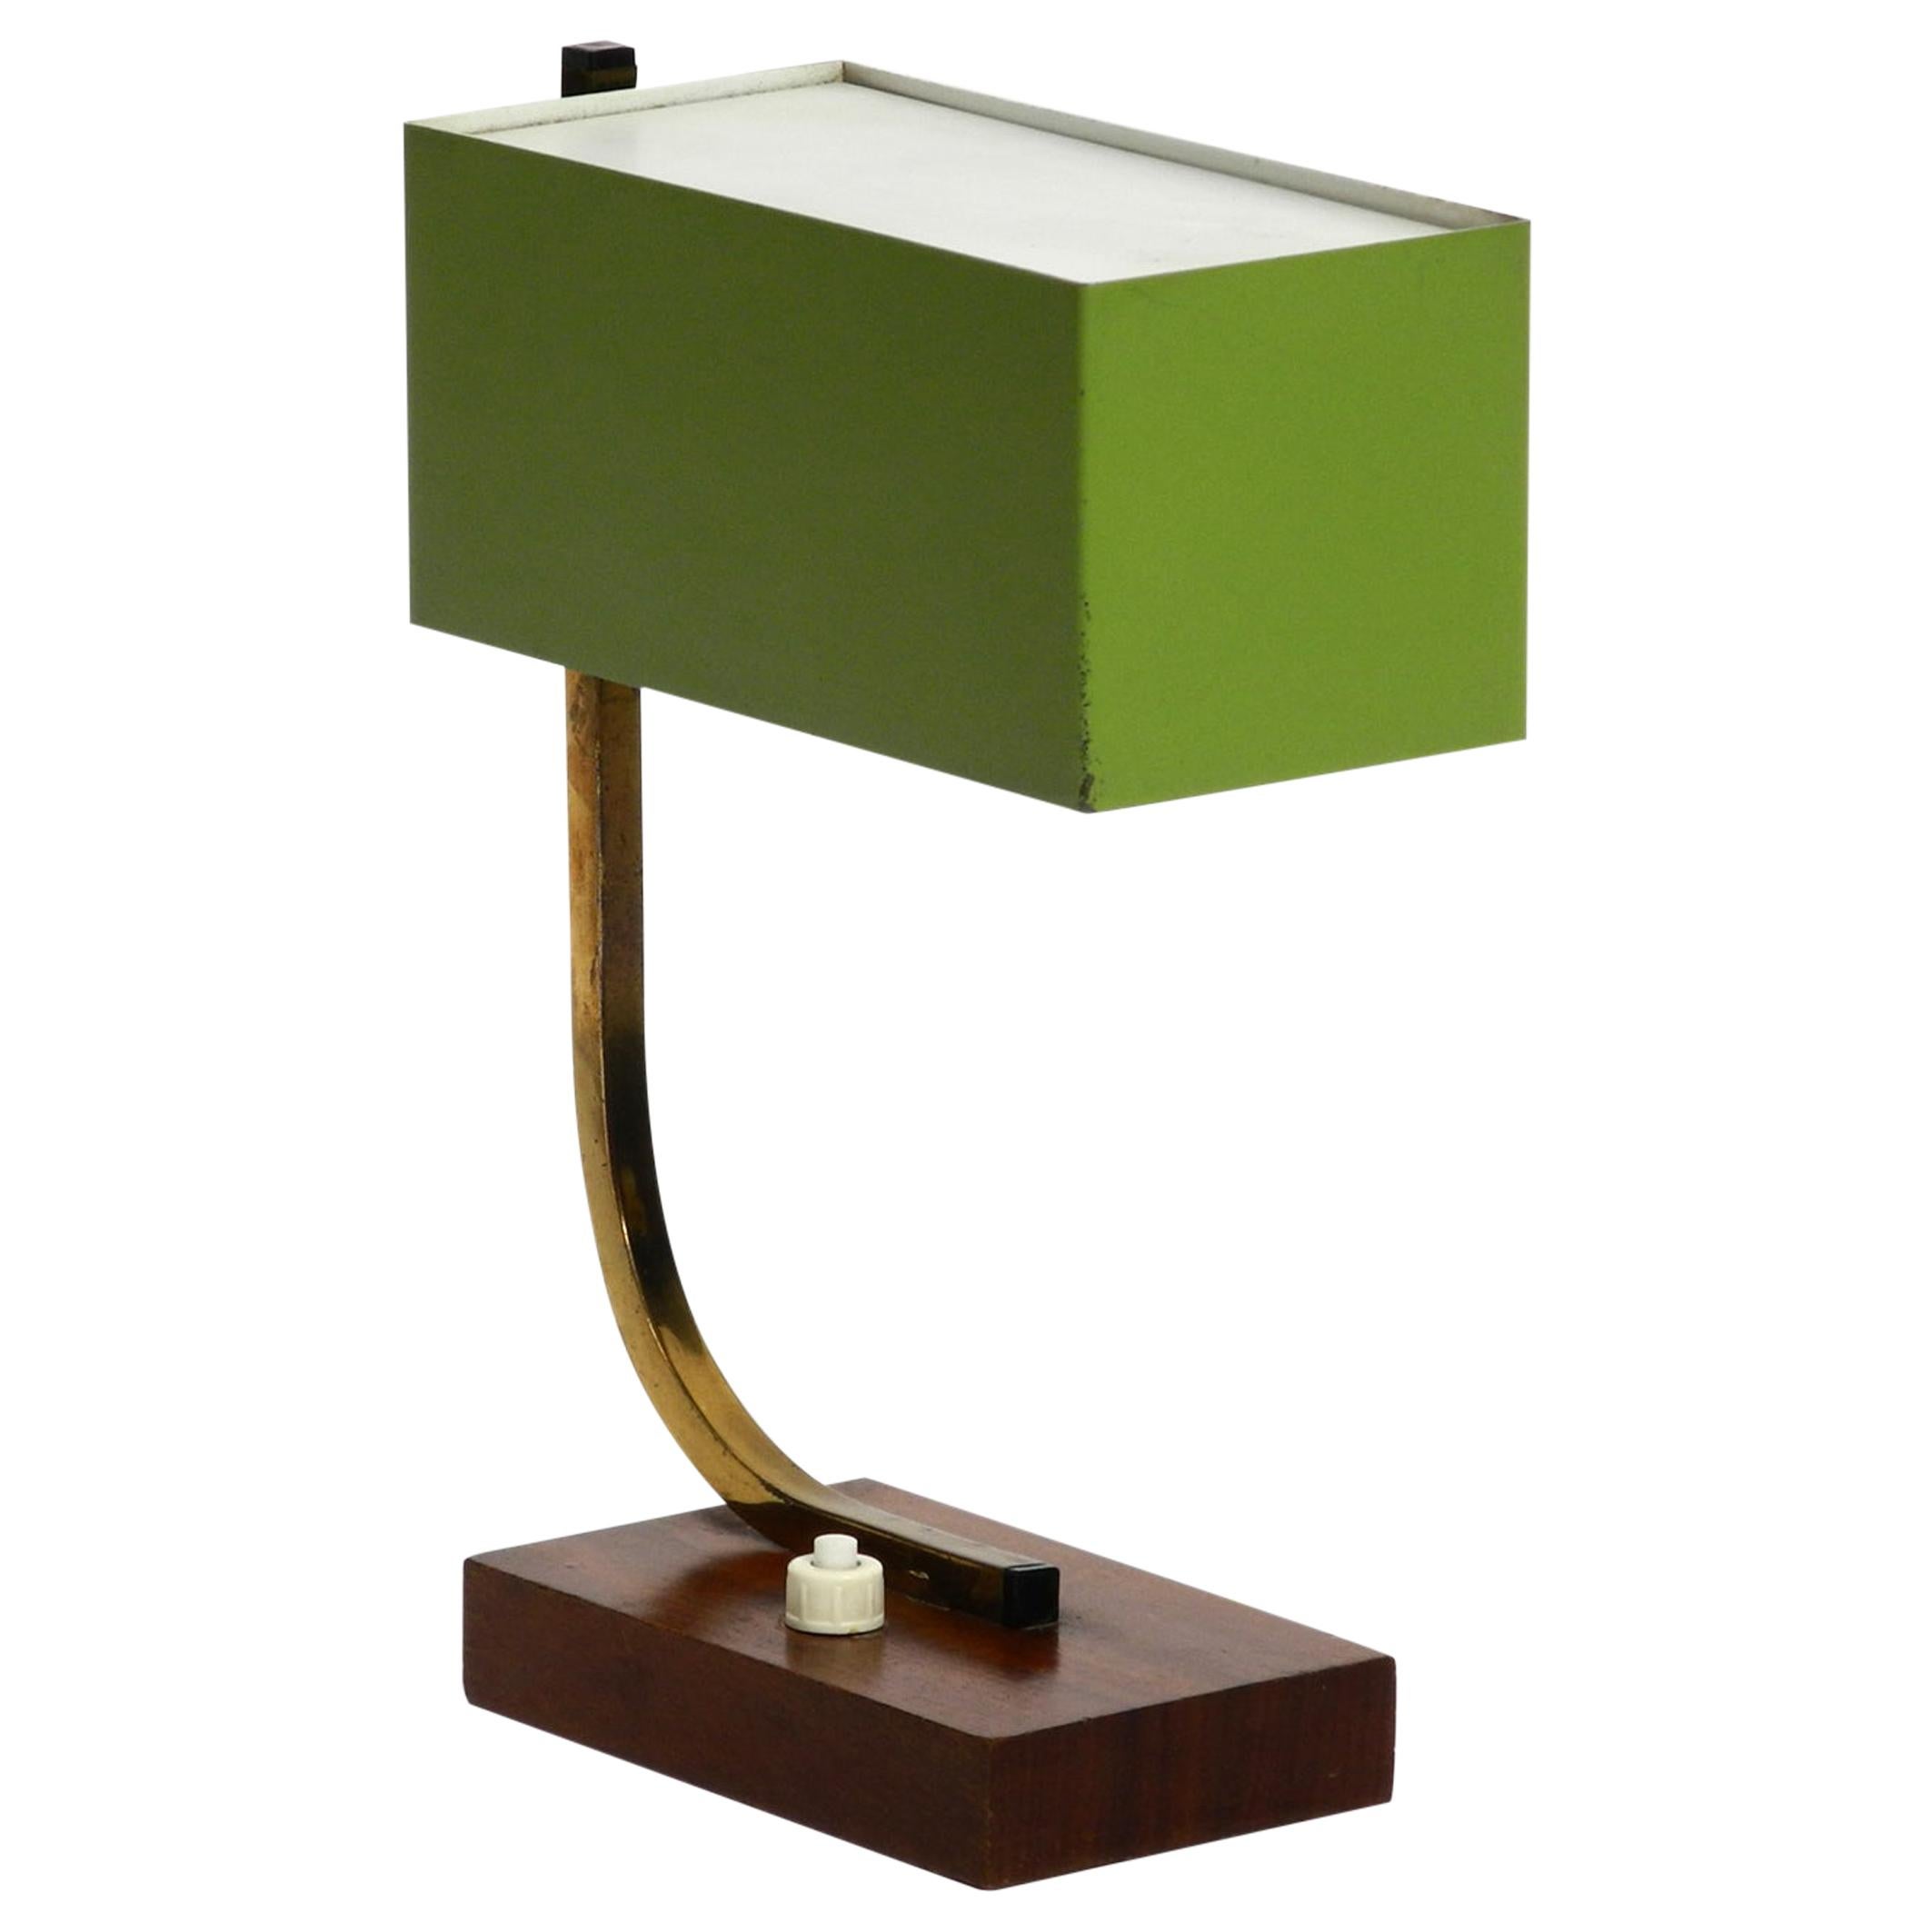 Exceptional Green Italian Mid-Century Modern Metal Bedside Lamp with Wooden Base